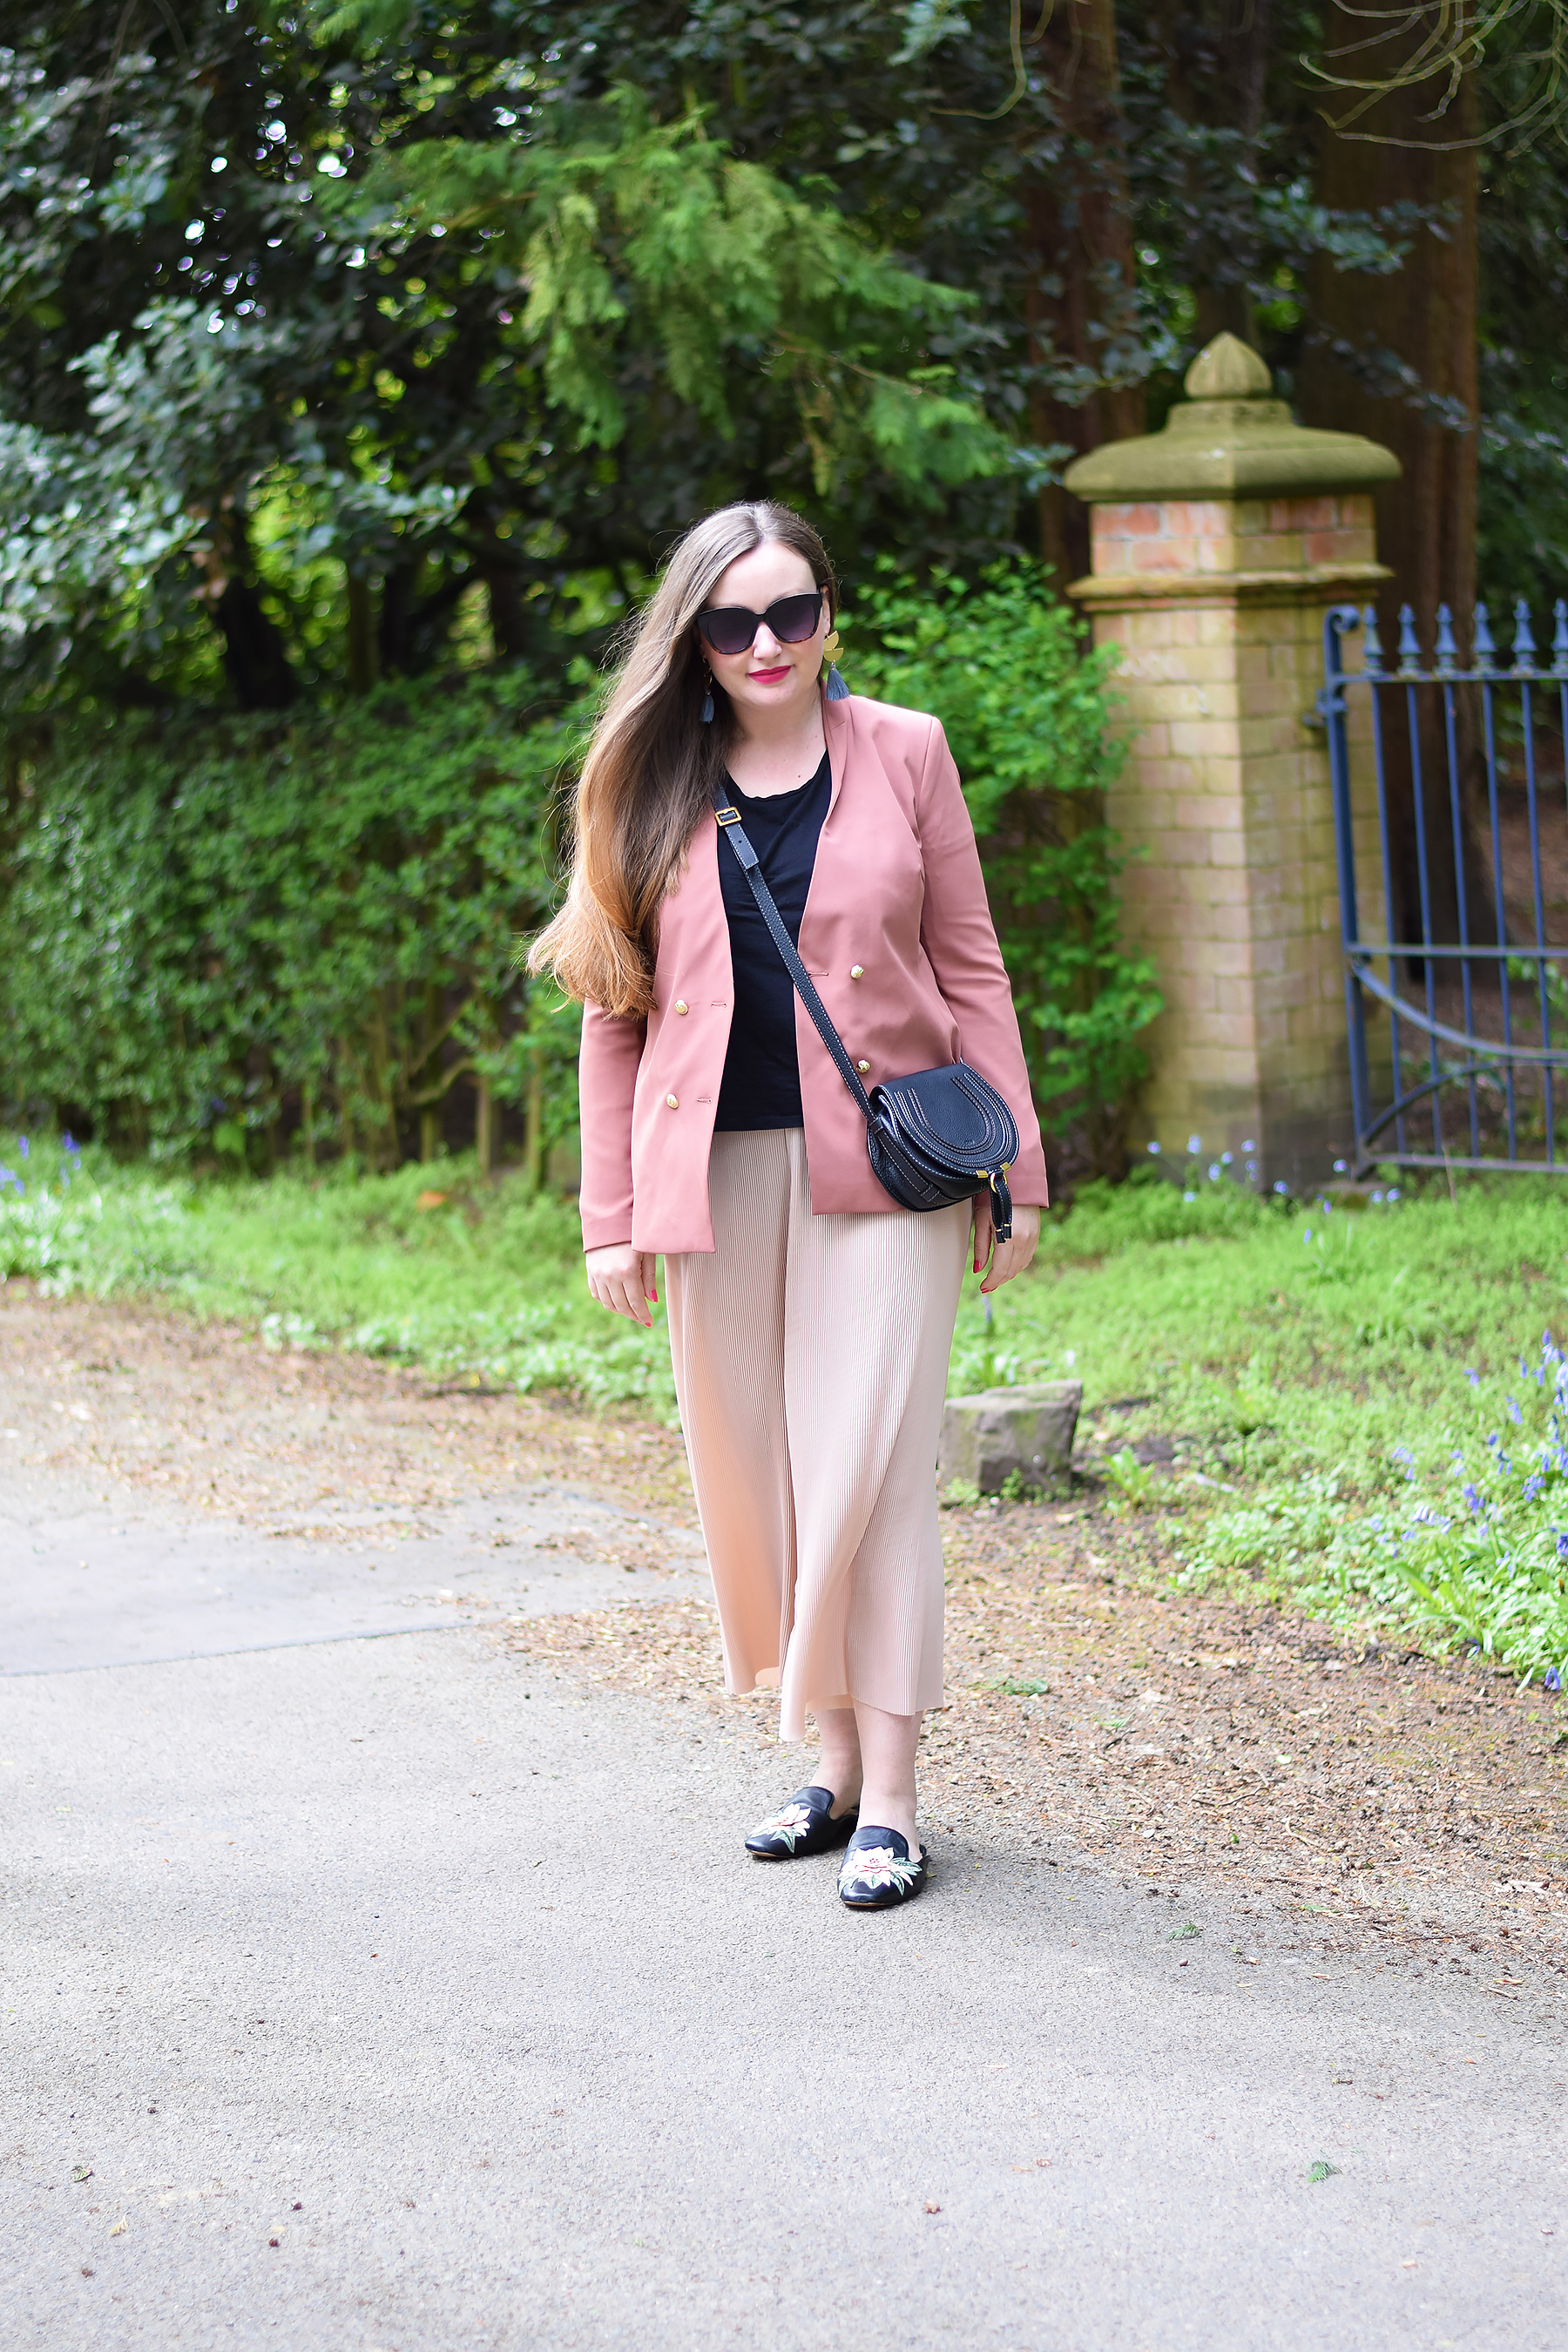 ZARA PLEATED TROUSERS OUTFIT DUSTY PINK